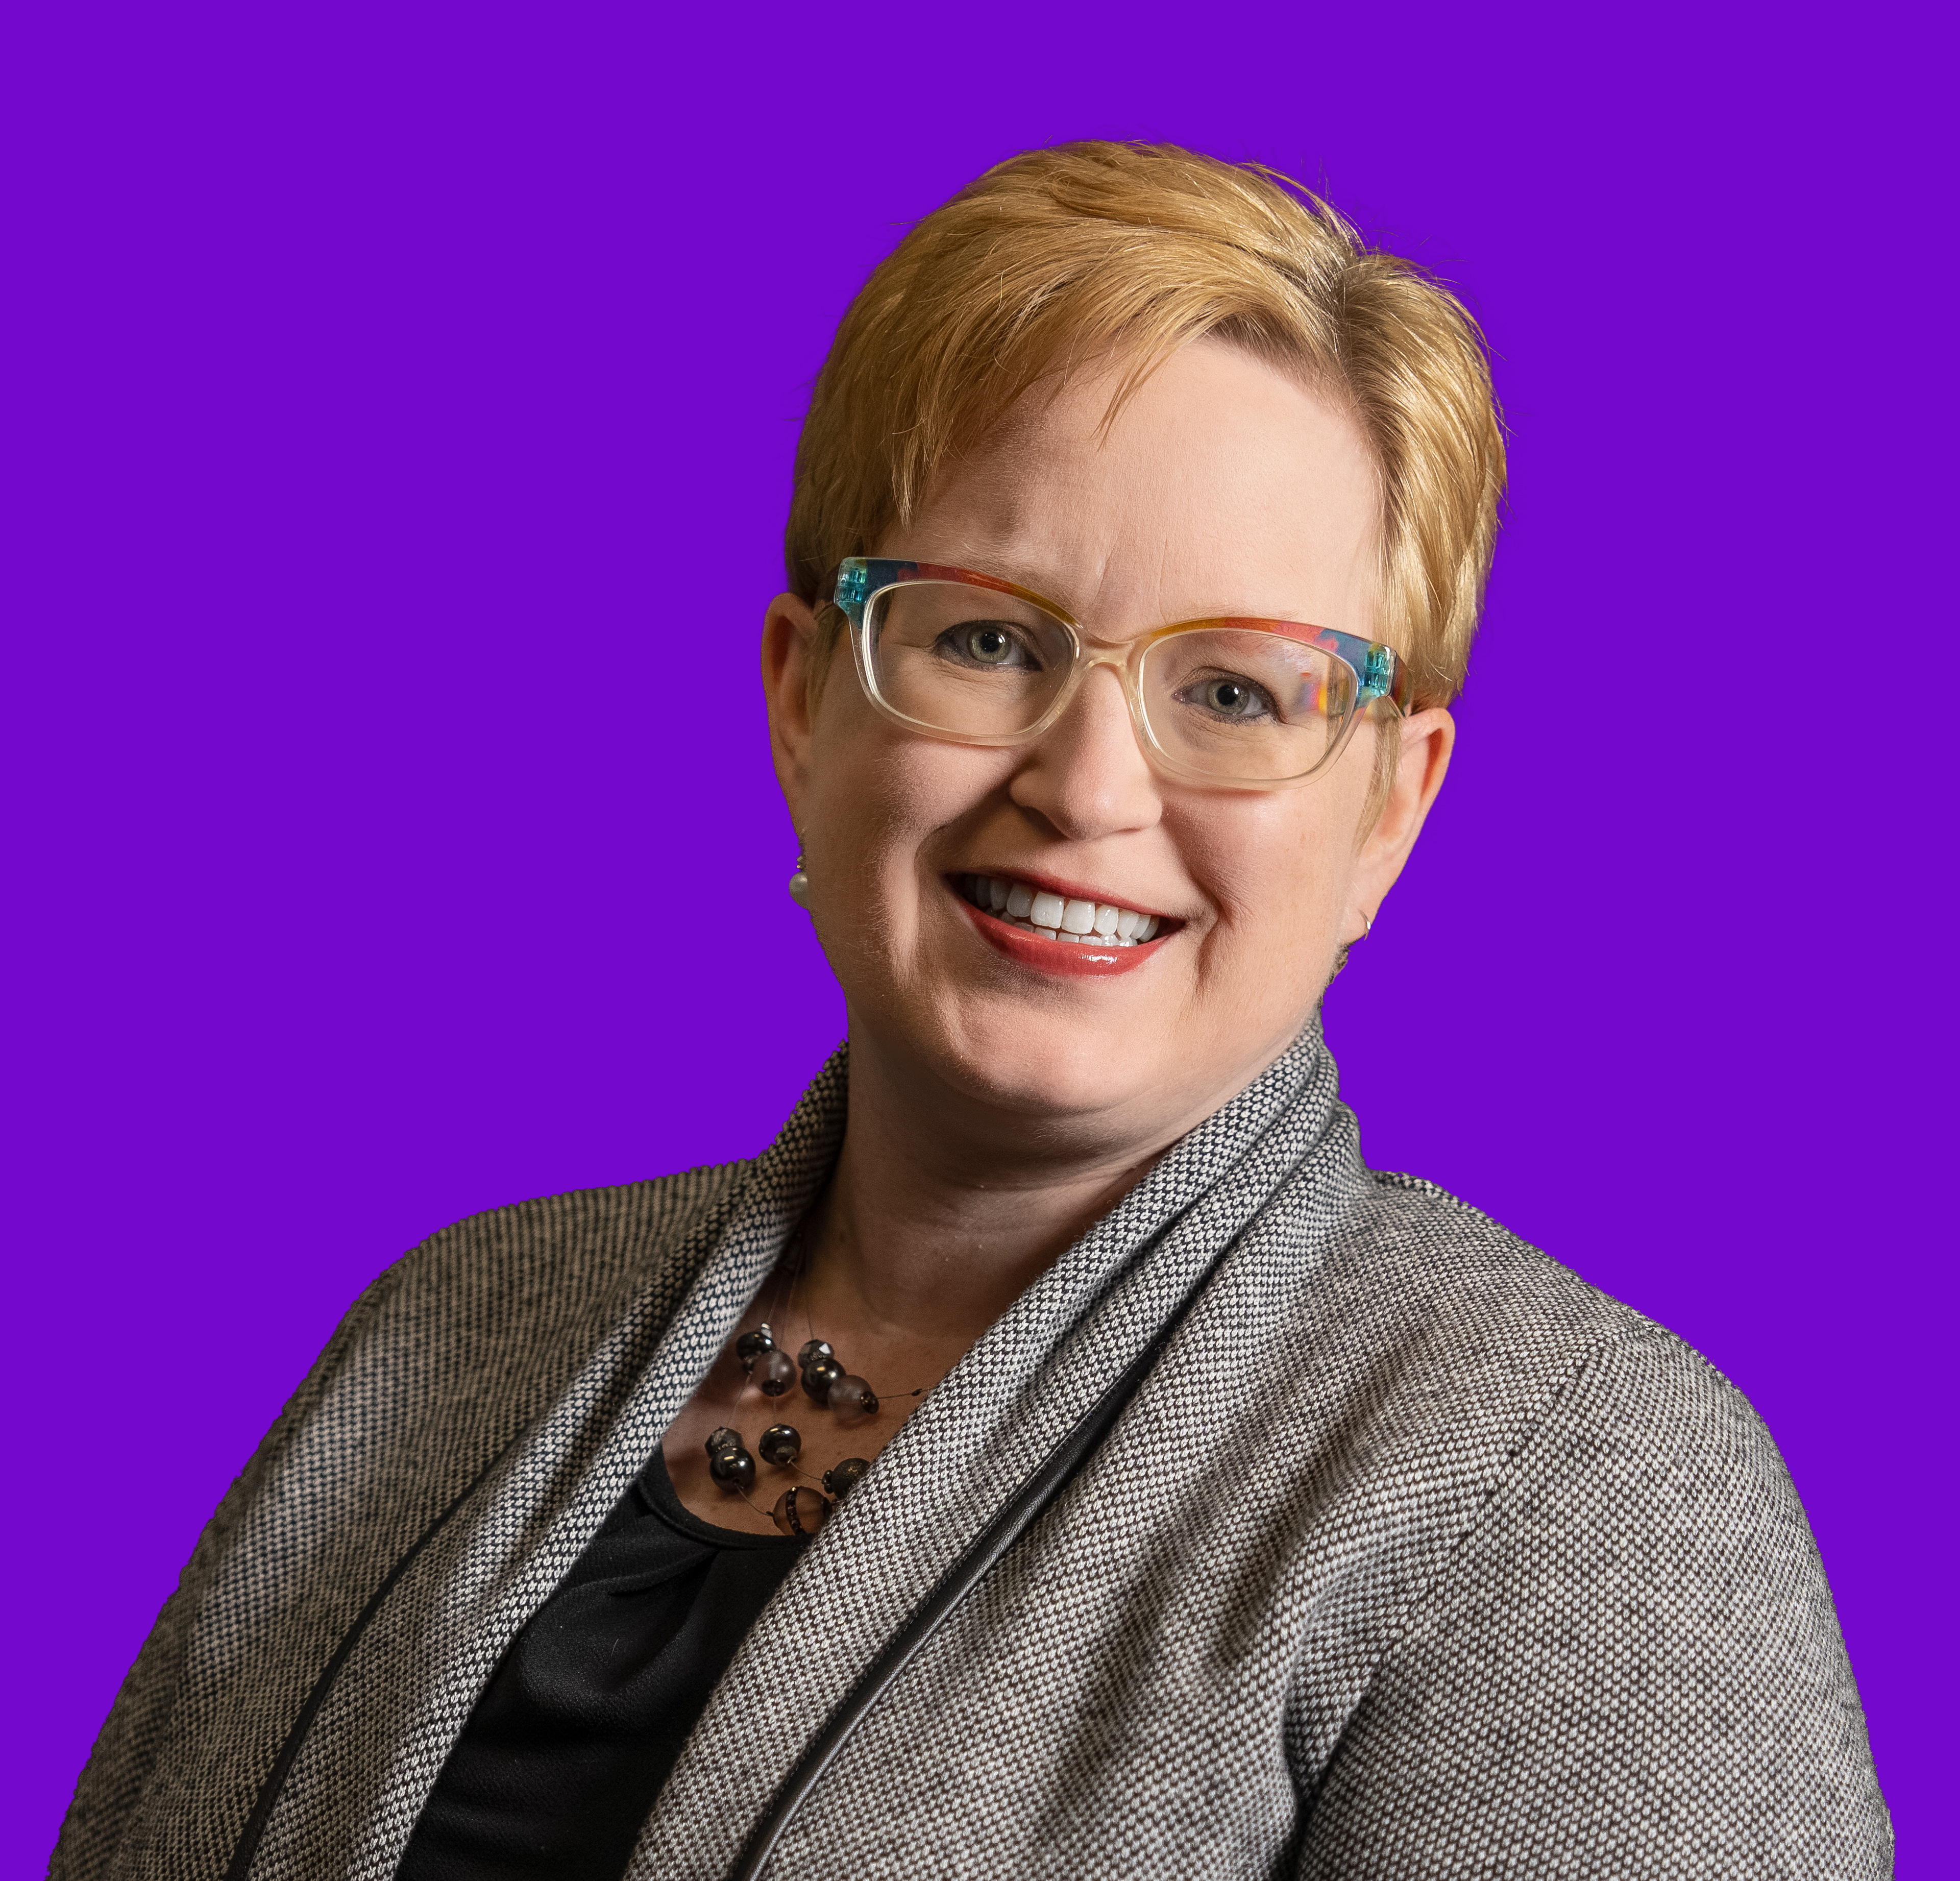 Profile image of Jolee Coulter on a solid purple background.